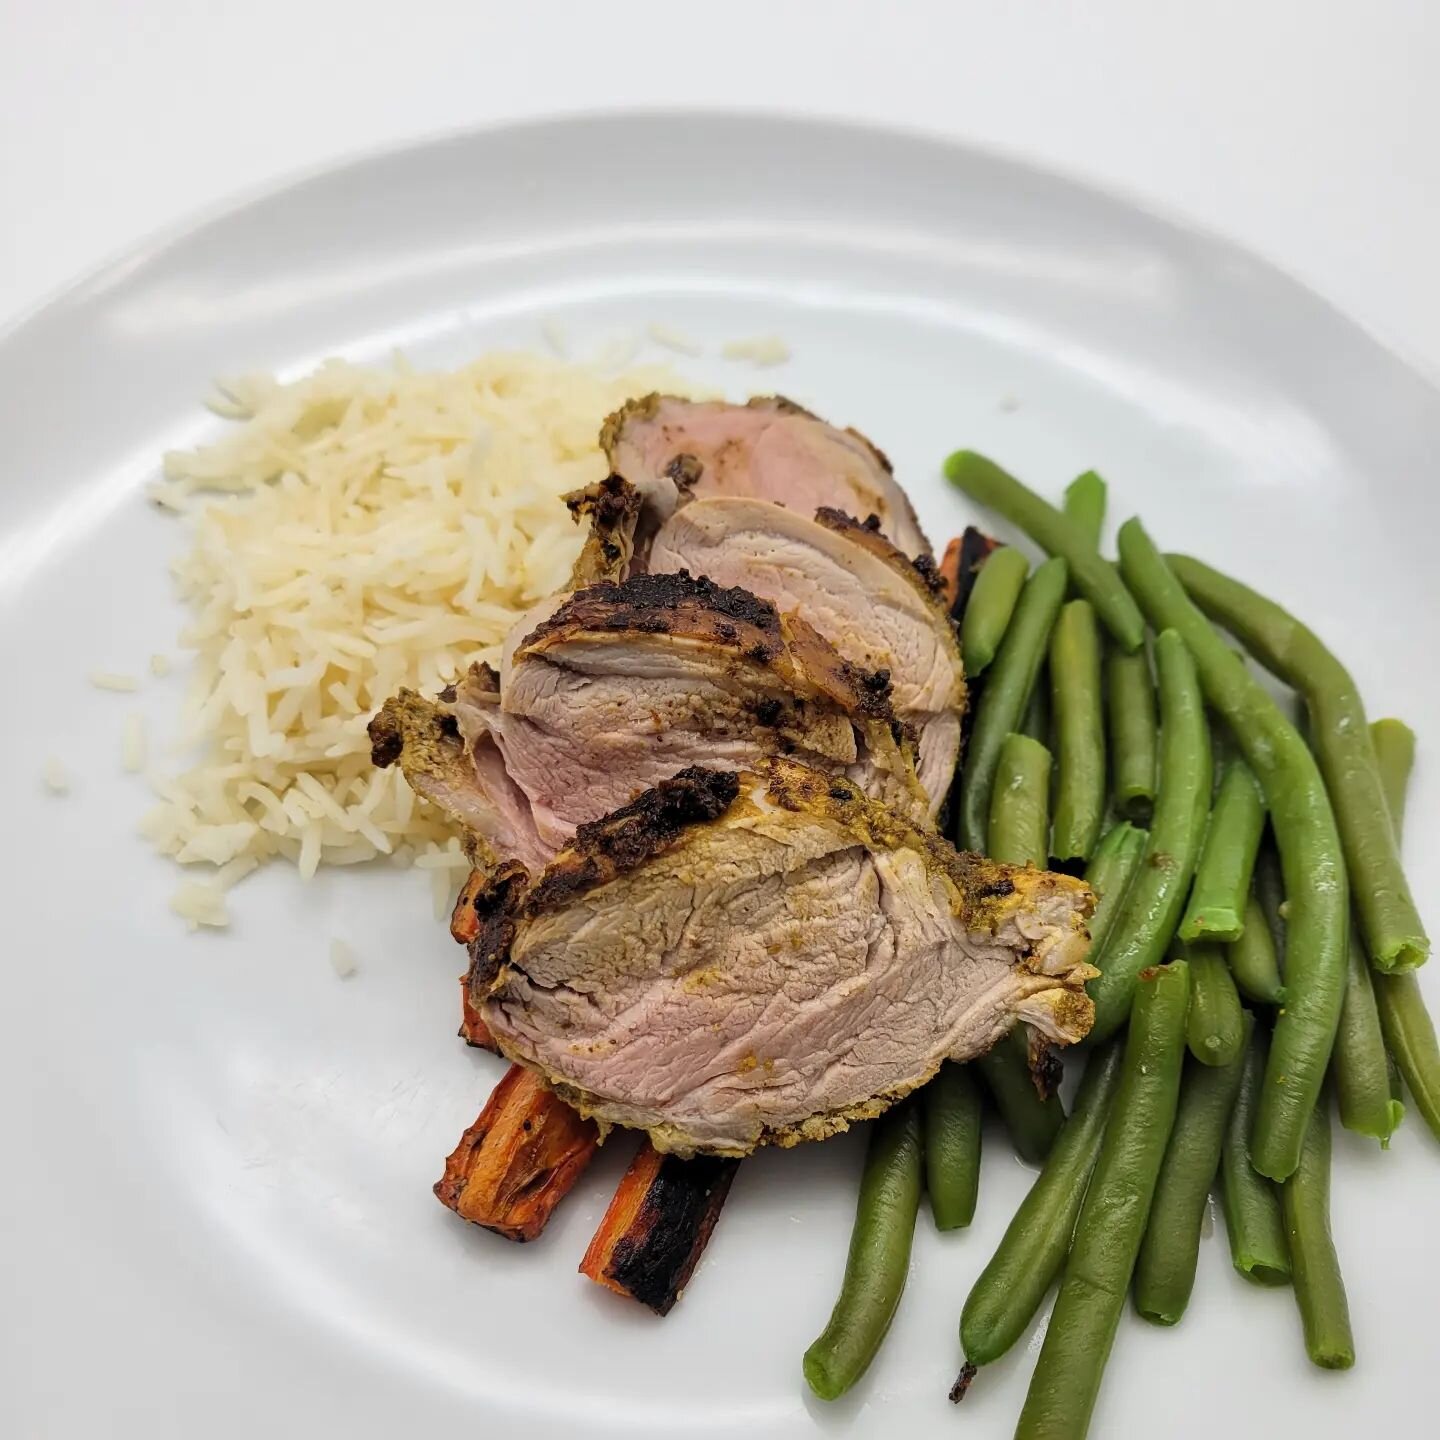 @jakescountrymeats pork tenderloin was incredibly juicy and tender! Just about any seasoning on this would be we uses our spicy Latin short run still hanging around since this past summer.  Pan roasted (seared and roasted in the same pan) at 400 degr